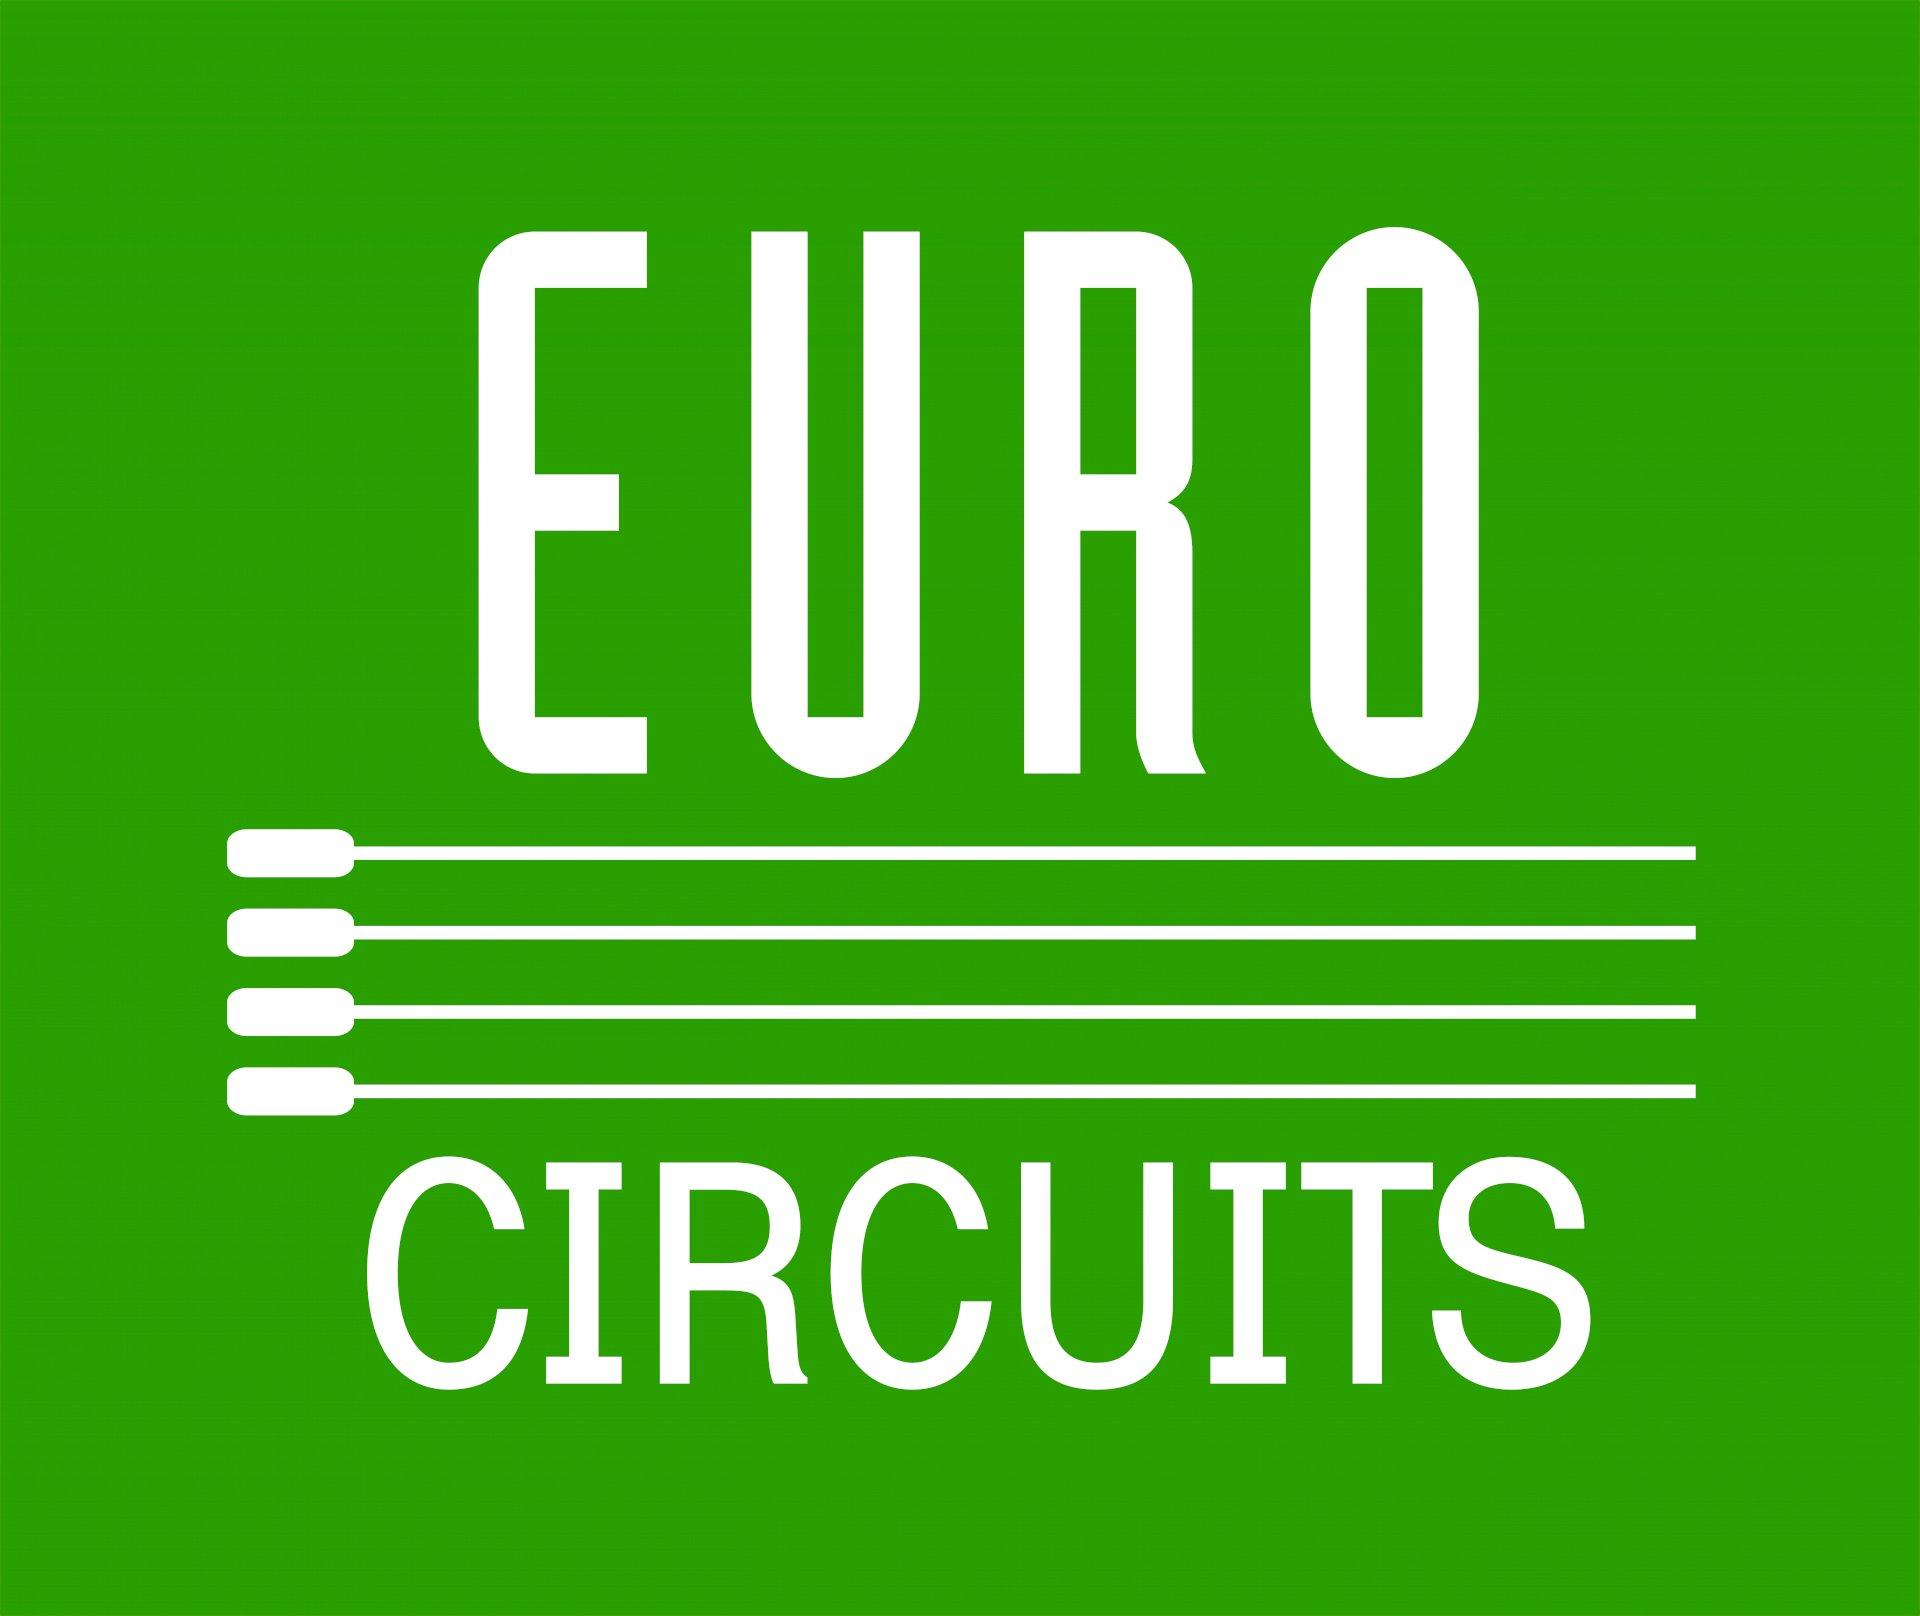 Eurocircuits wishes you a welcome back!